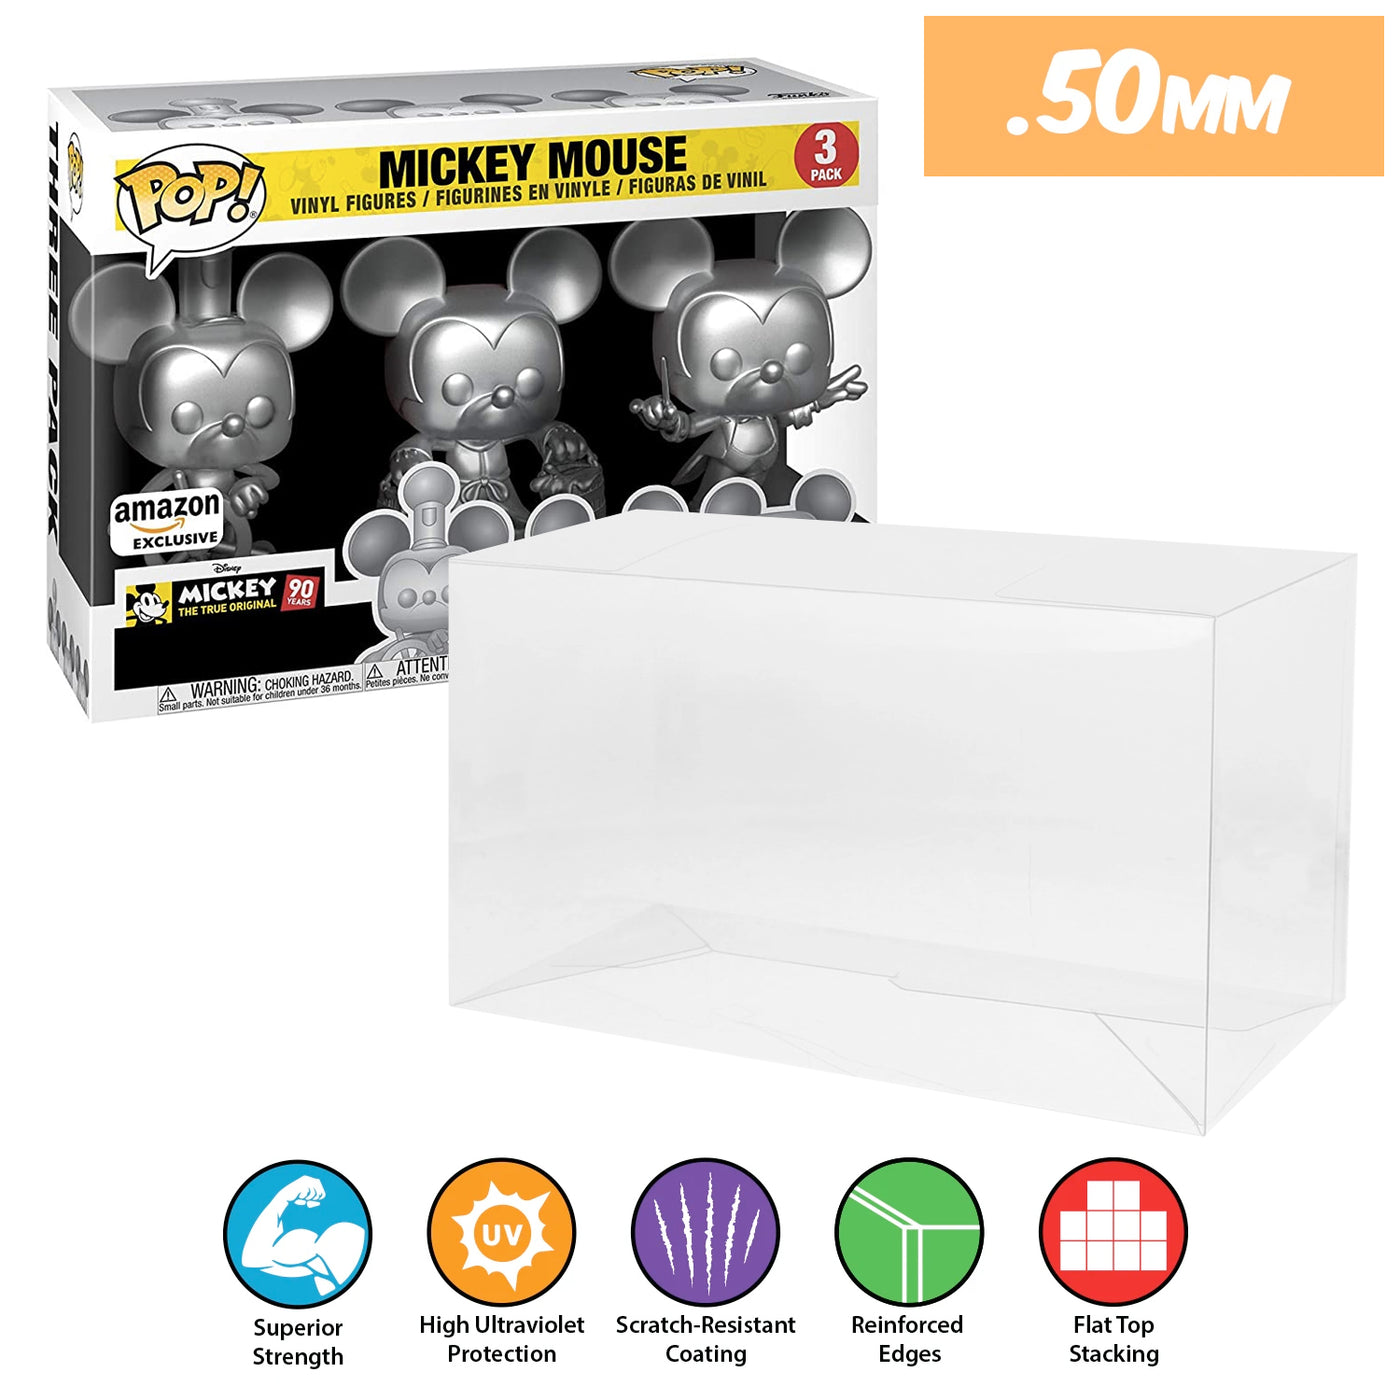 mickey mouse amazon 3 pack best funko pop protectors thick strong uv scratch flat top stack vinyl display geek plastic shield vaulted eco armor fits collect protect display case kollector protector